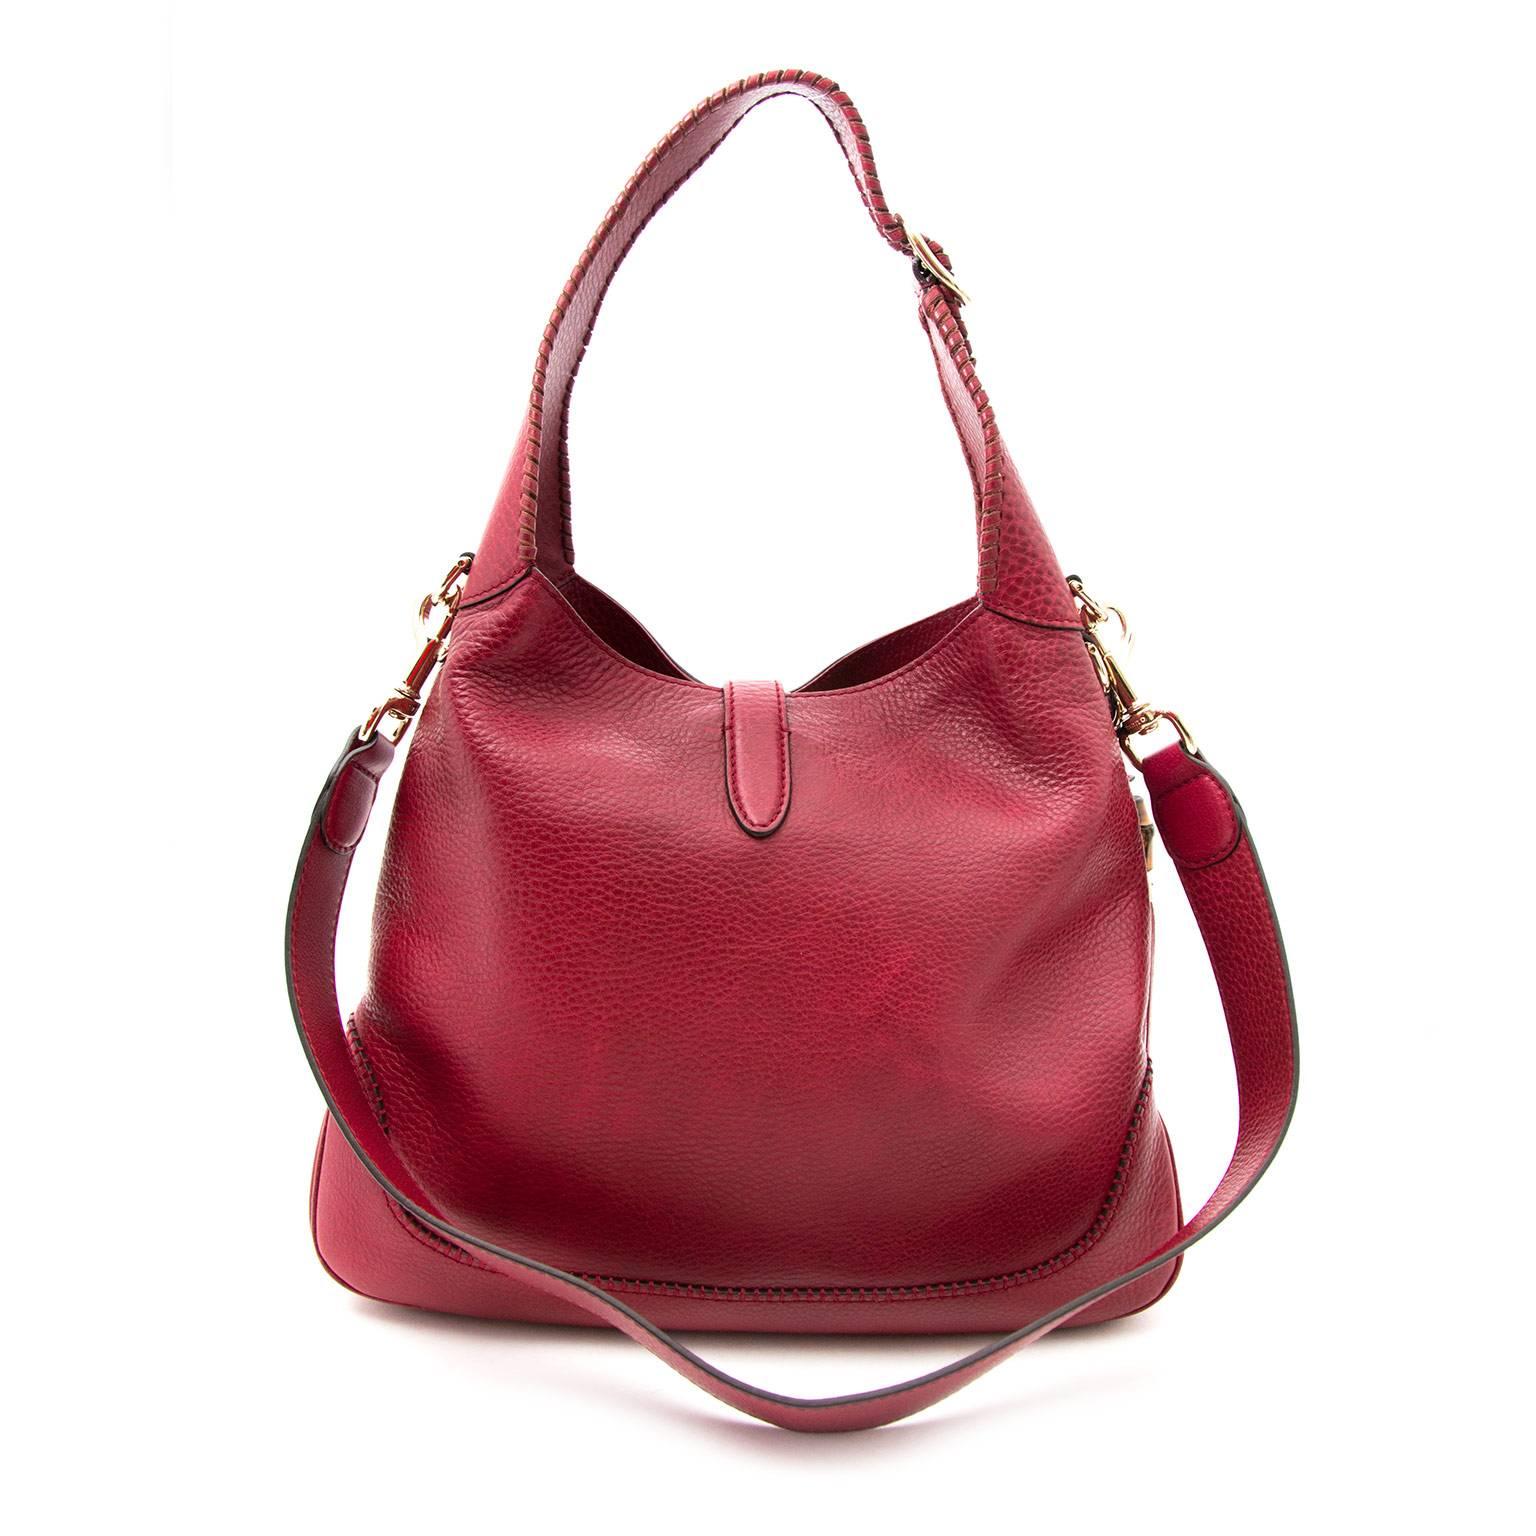 This Jackie soft hobo bag comes in a dark deep red color with gold toned hardware and bamboo details.

The interior is very spacious, comes in one large compartment with one side zip pocket and two side pockets.

The soft grained leather gives the